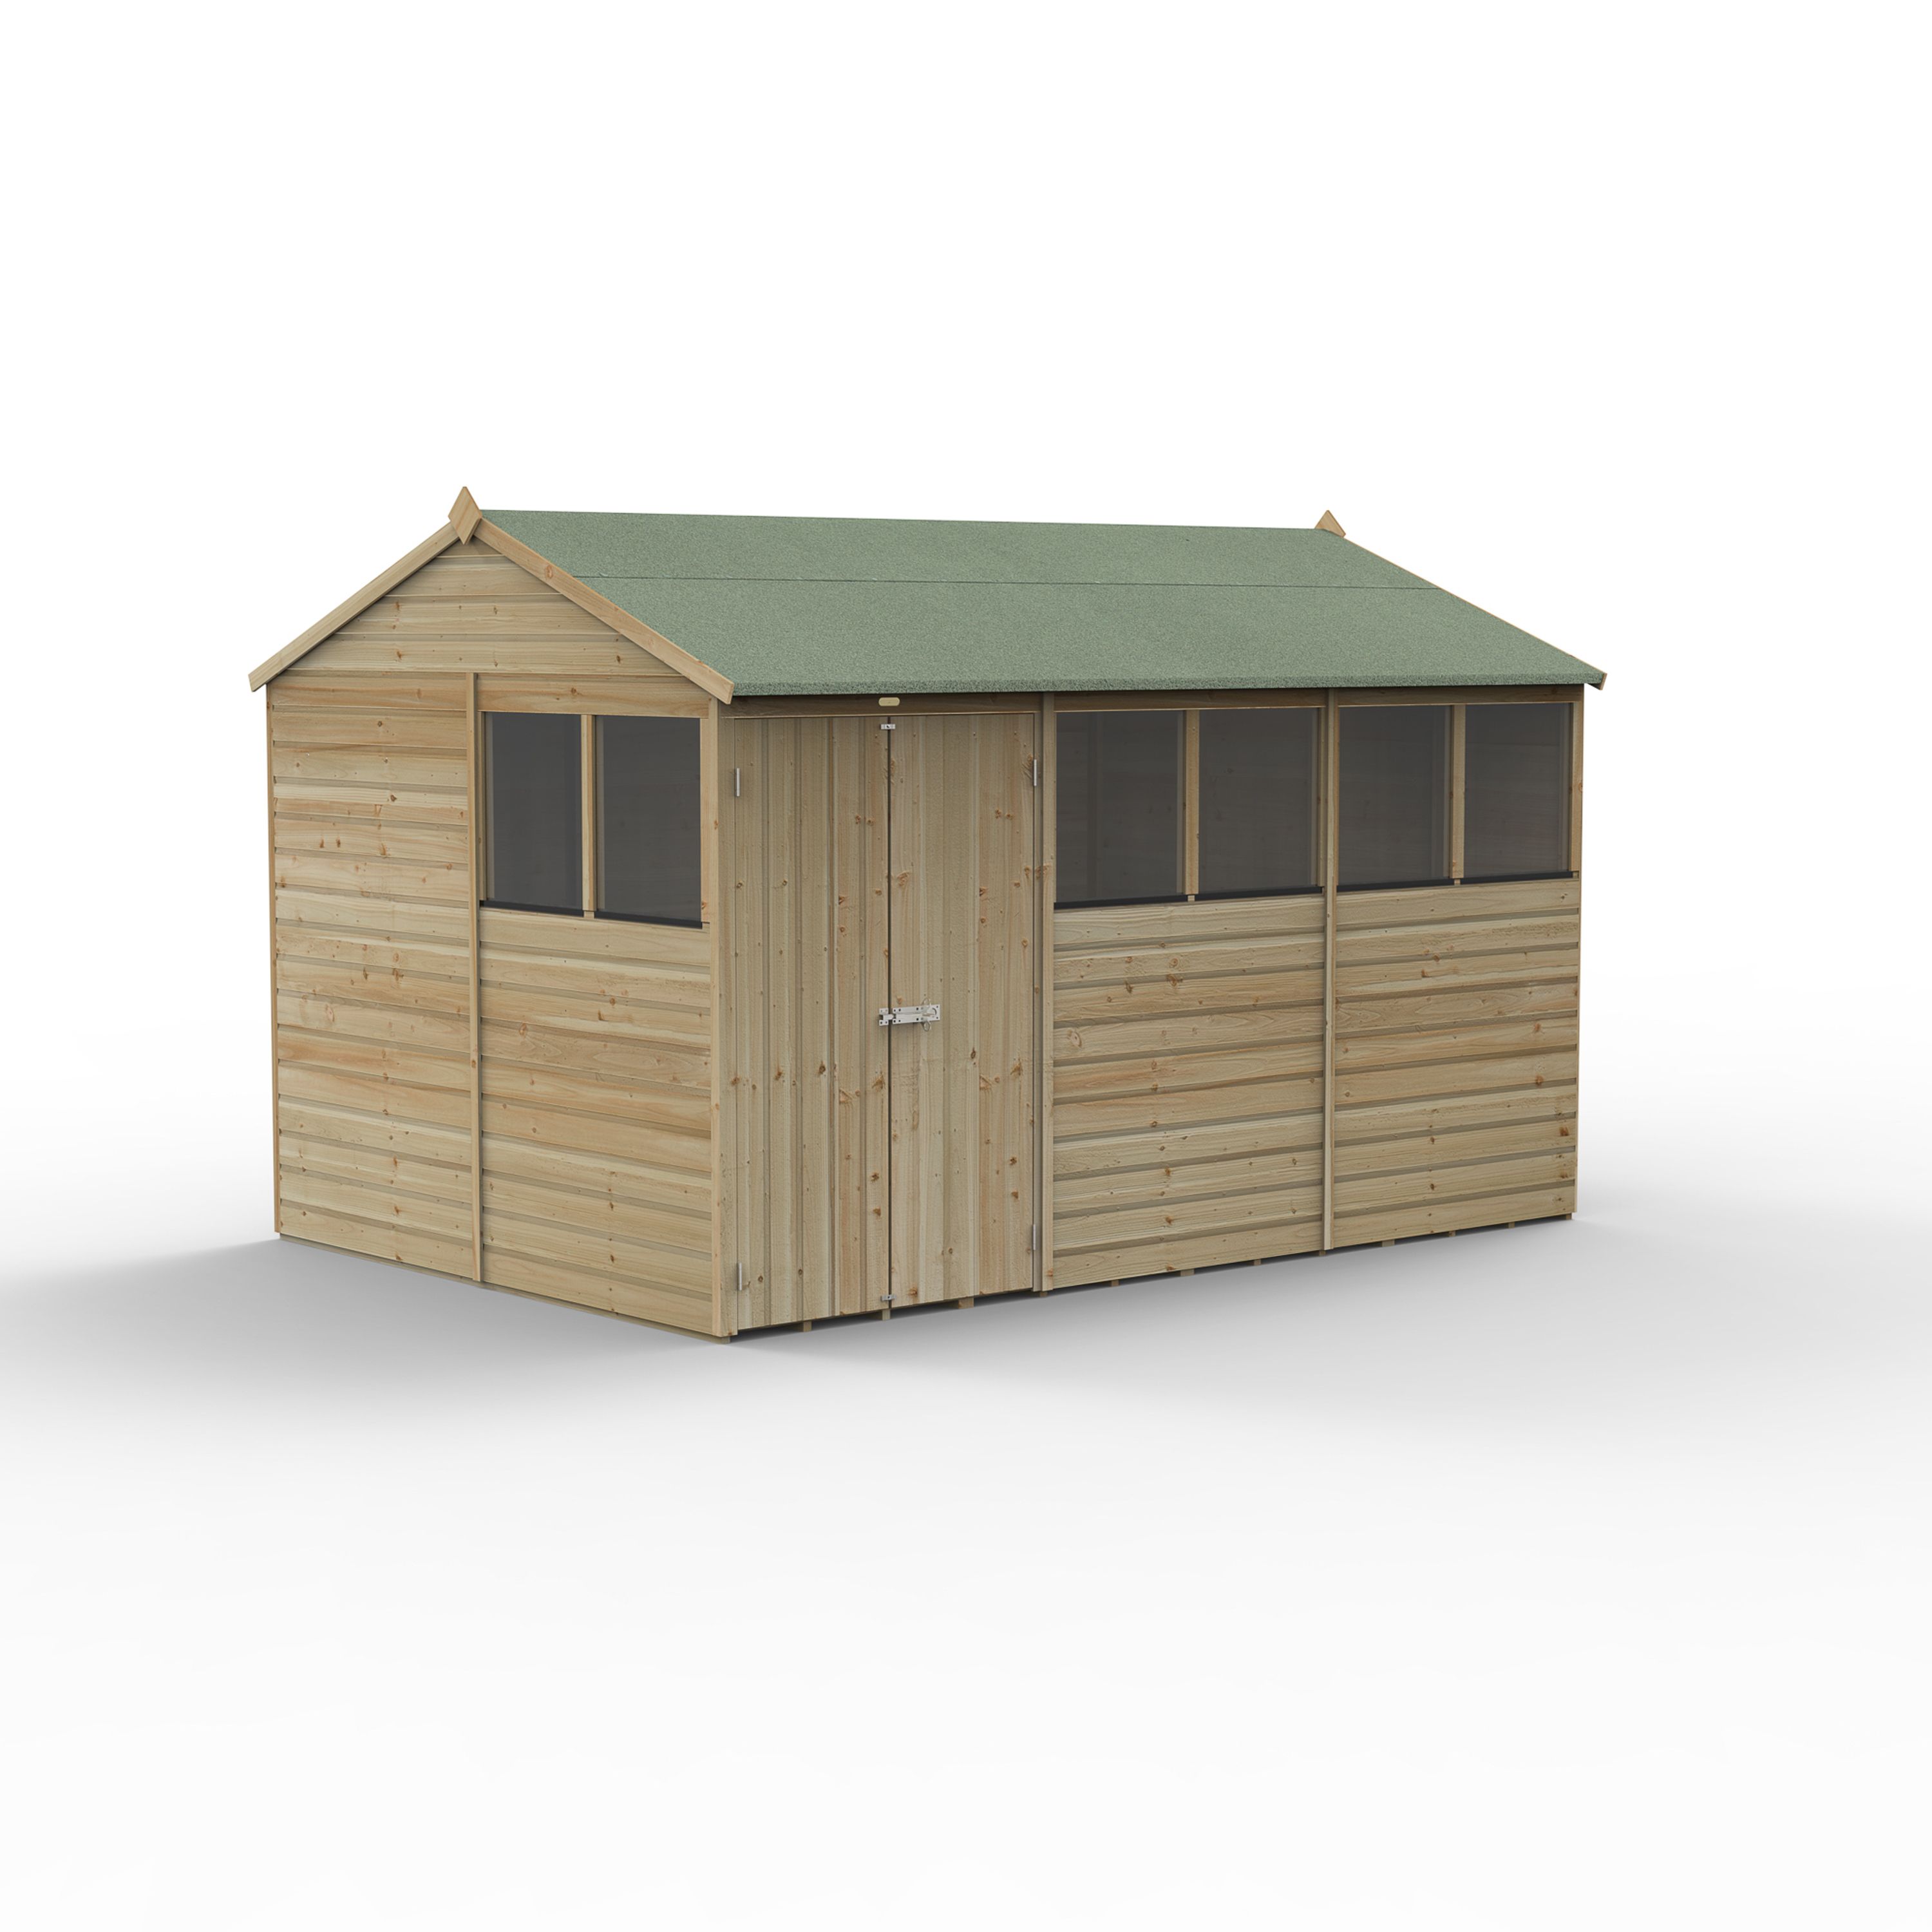 Forest Garden Beckwood 12x8 ft Reverse apex Natural timber Wooden 2 door Shed with floor & 6 windows - Assembly not required